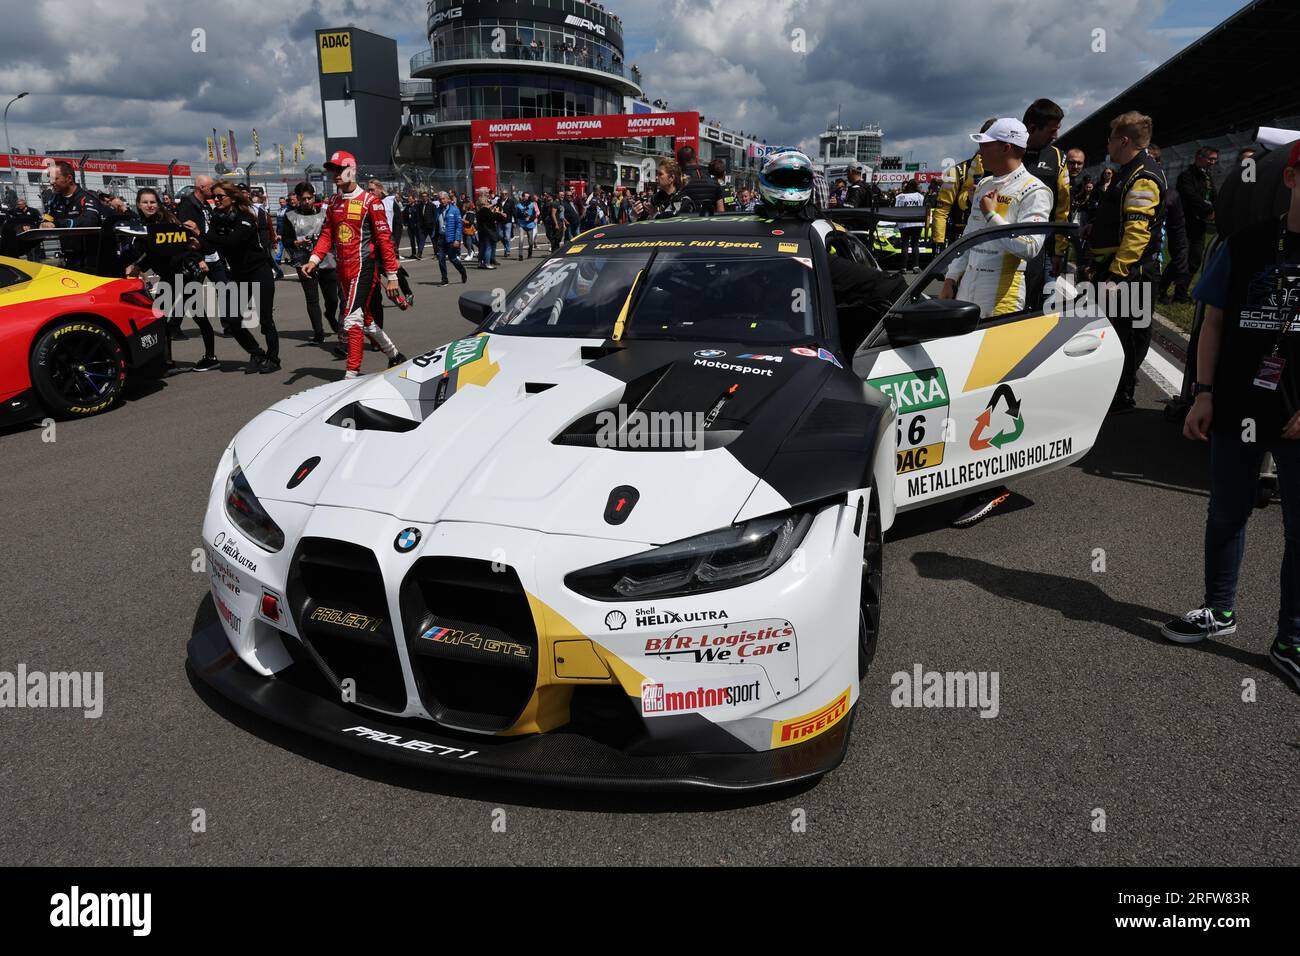 NUERBURGRING, Germany. , . DTM, German Touring car Masters at the Nürburgring, #56, Sandro HOLZEM, GER, Project 1, BMW M4 GT3, during the race on Saturday on 5. August. fee liable image, photo and copyright © Gerard SERSTEVENS/ATP images (SERSTEVENS Gerard/ATP/SPP) Credit: SPP Sport Press Photo. /Alamy Live News Stock Photo